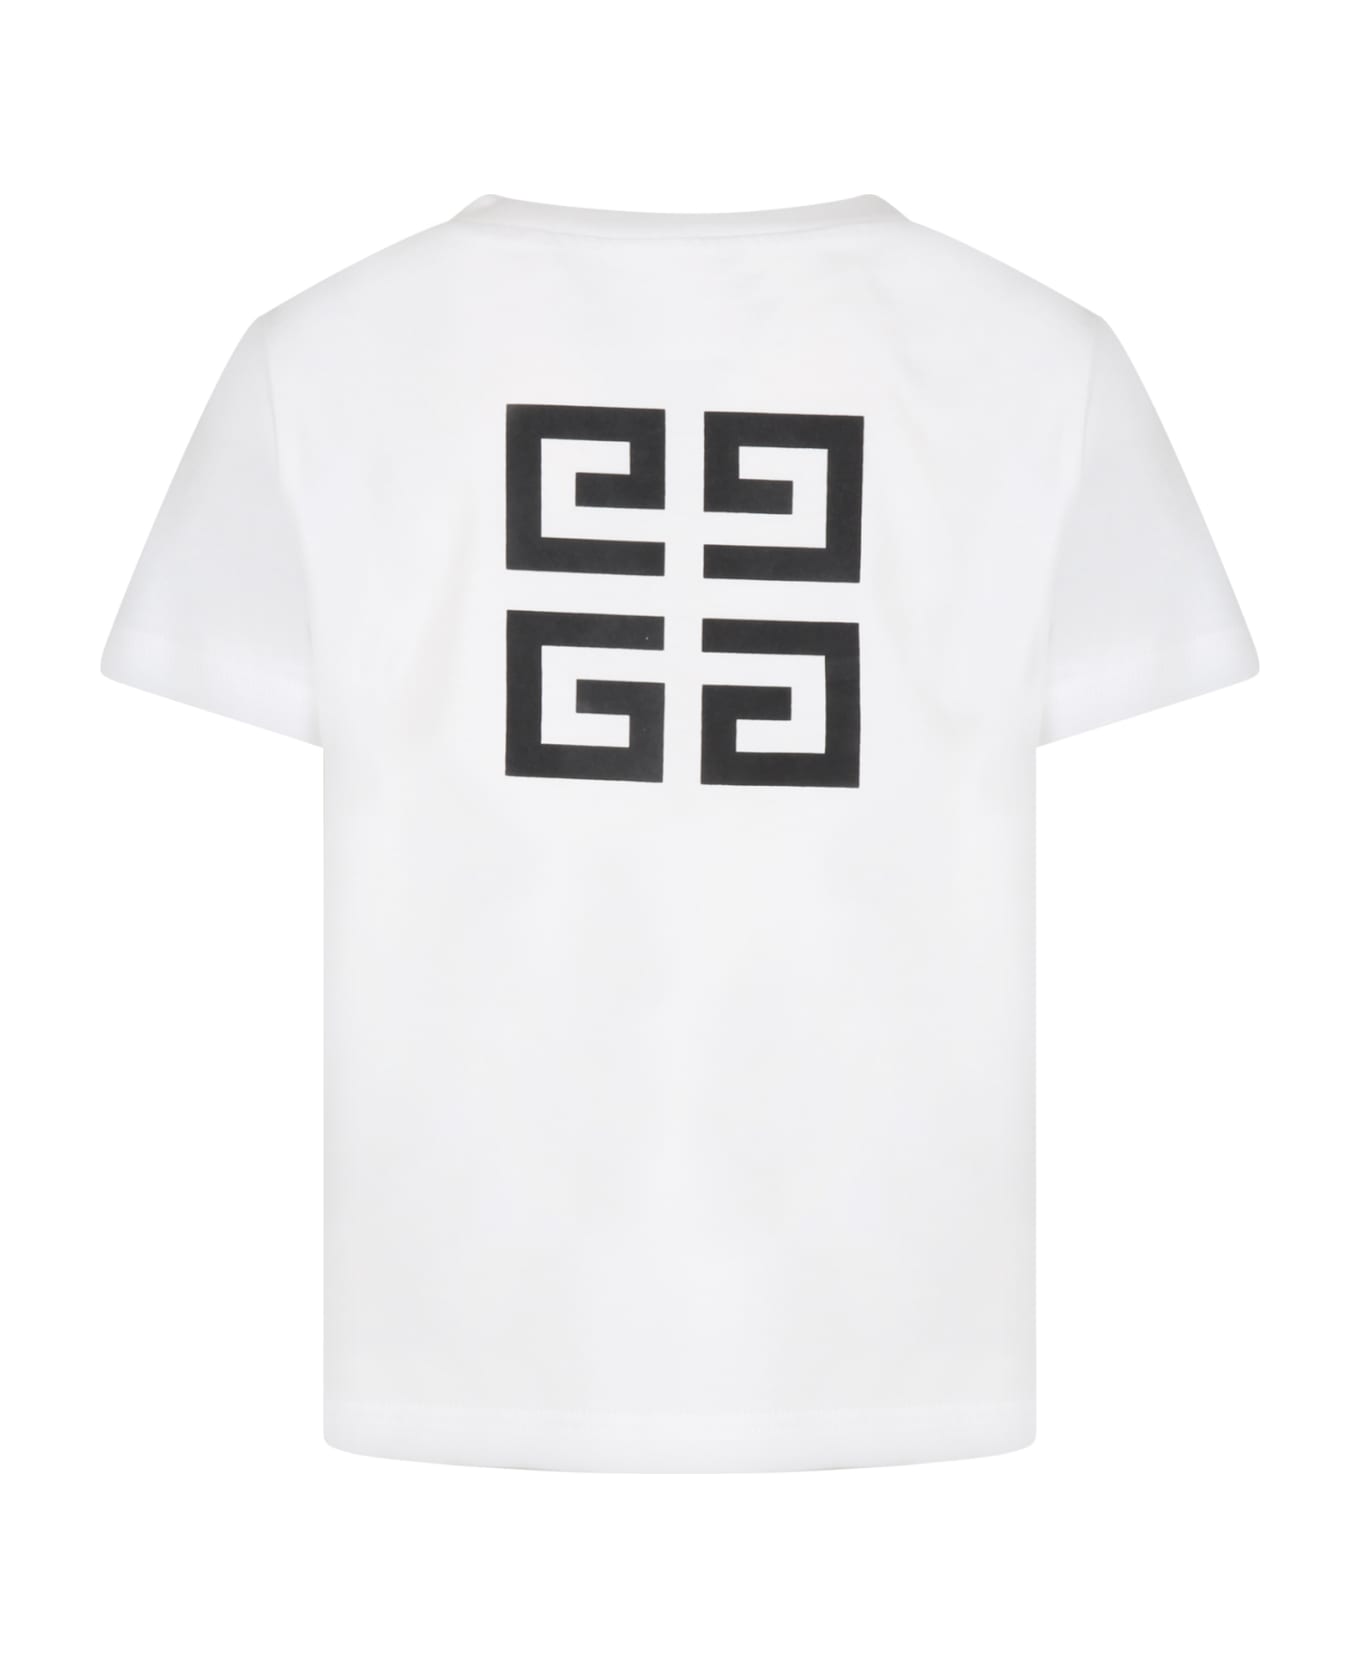 Givenchy White T-shirt For Boy With Black versible - White